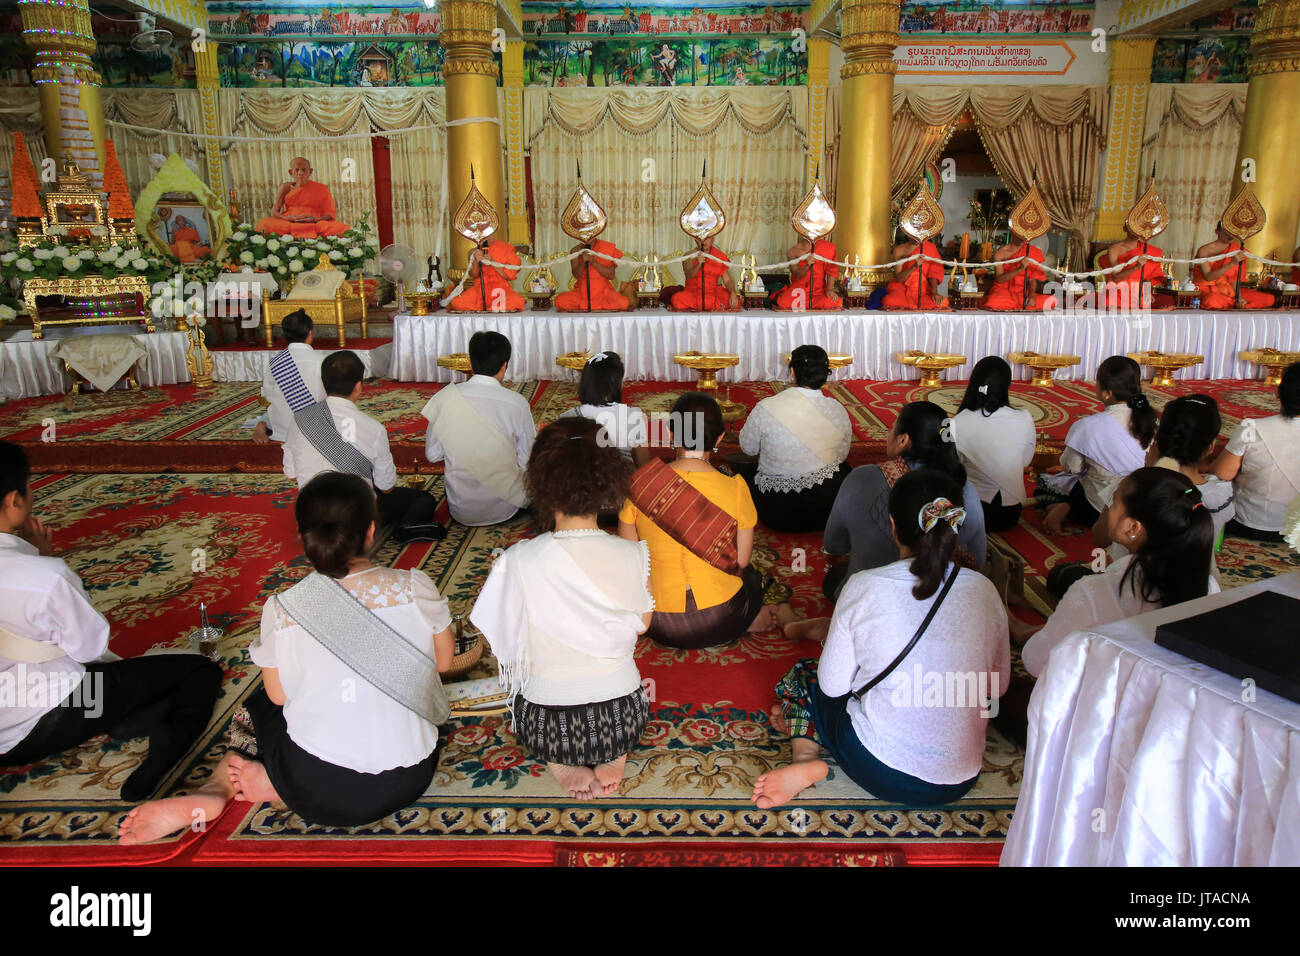 Buddhist monks praying at Remembrance of the Deceased, Wat Ong Teu Mahawihan (Temple of the Heavy Buddha), Vientiane, Laos Stock Photo